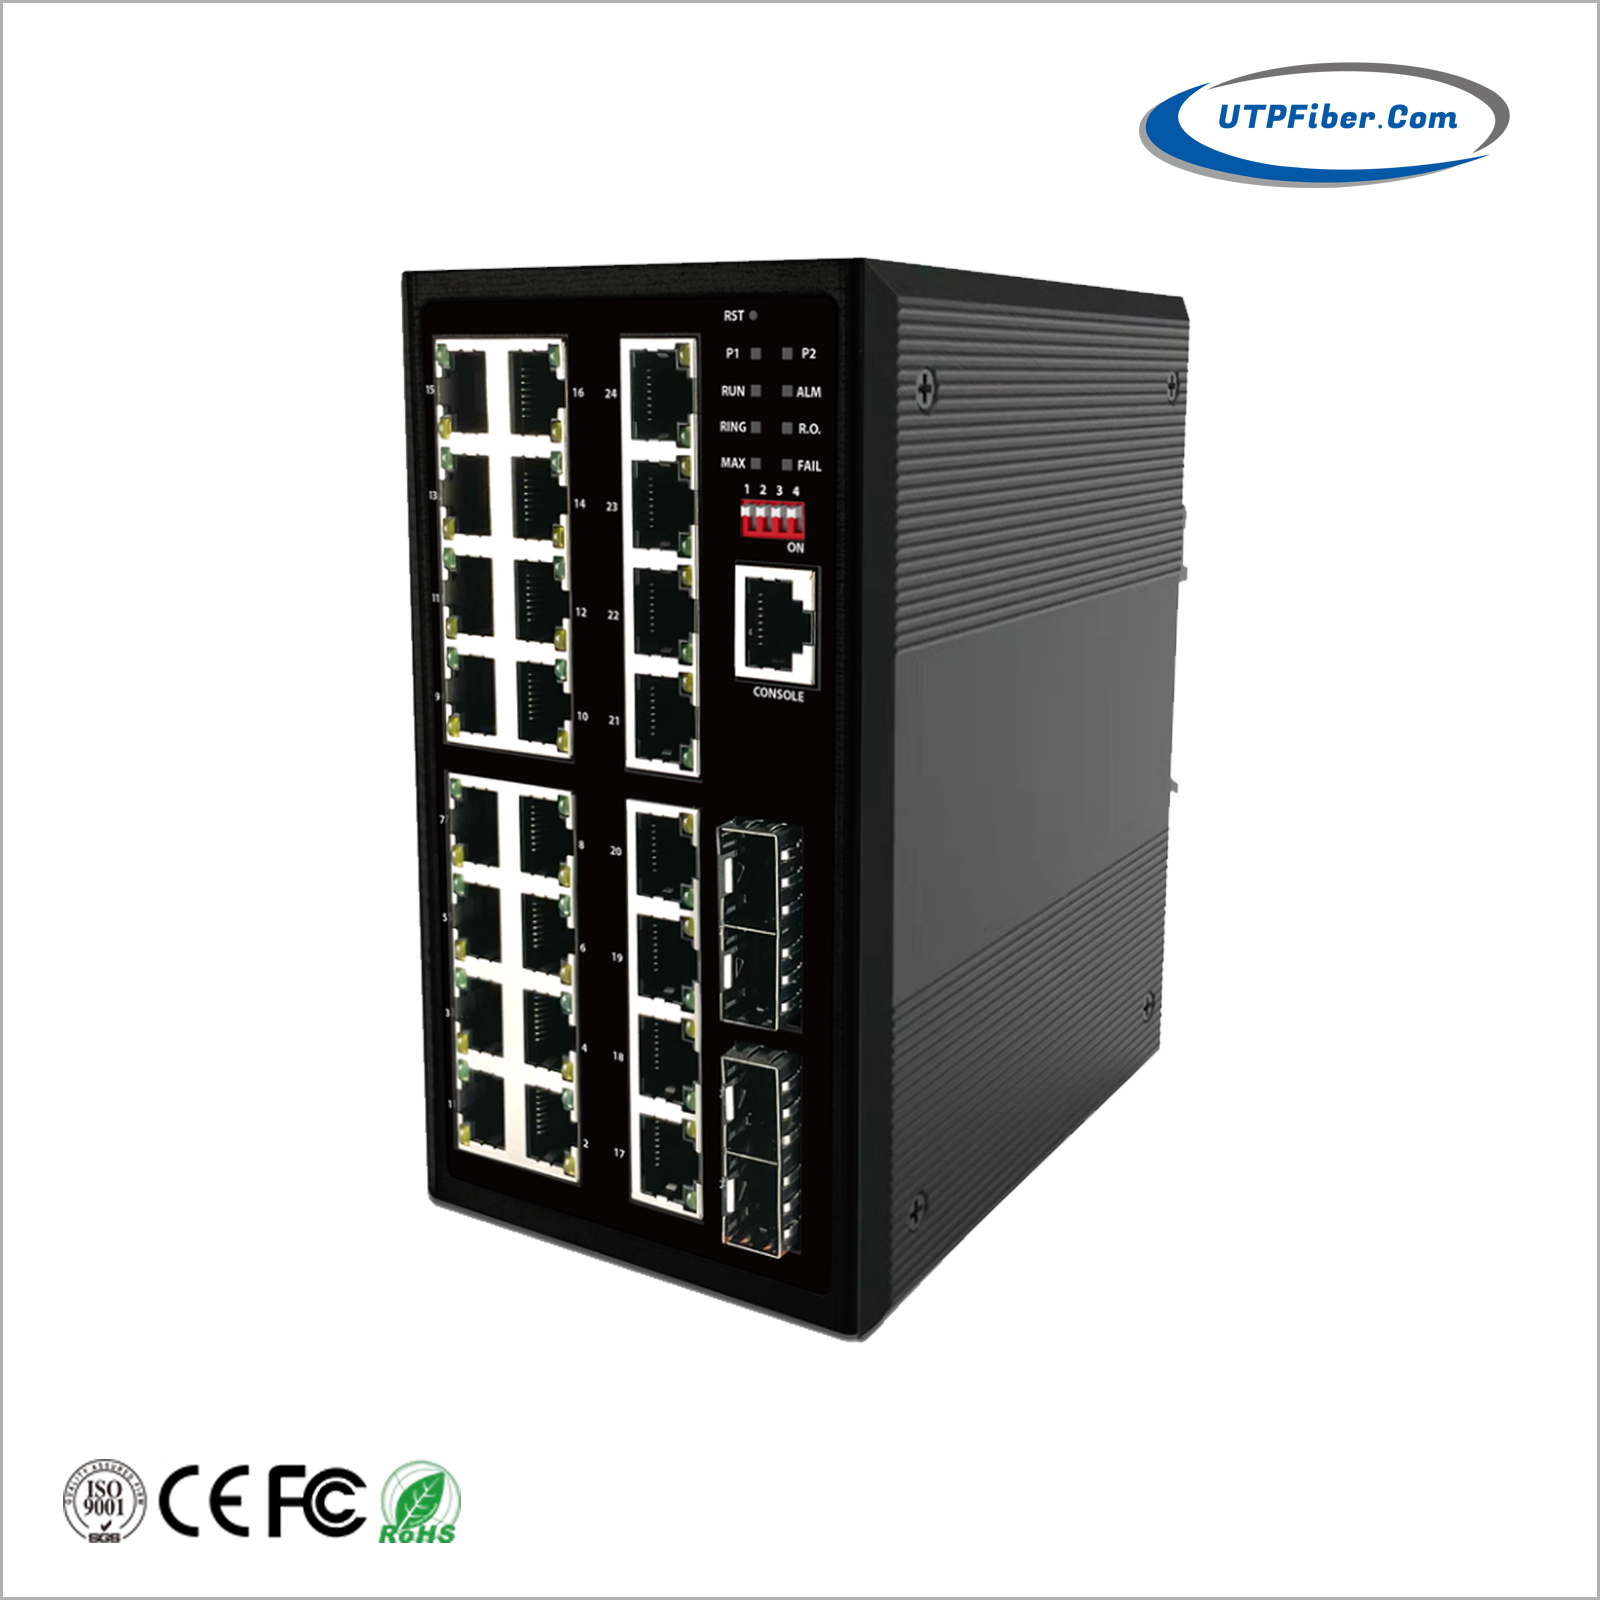 L2+ Industrial 24-Port 10/100/1000T 802.3at PoE + 4-Port 100/1000X SFP Managed Ethernet Switch